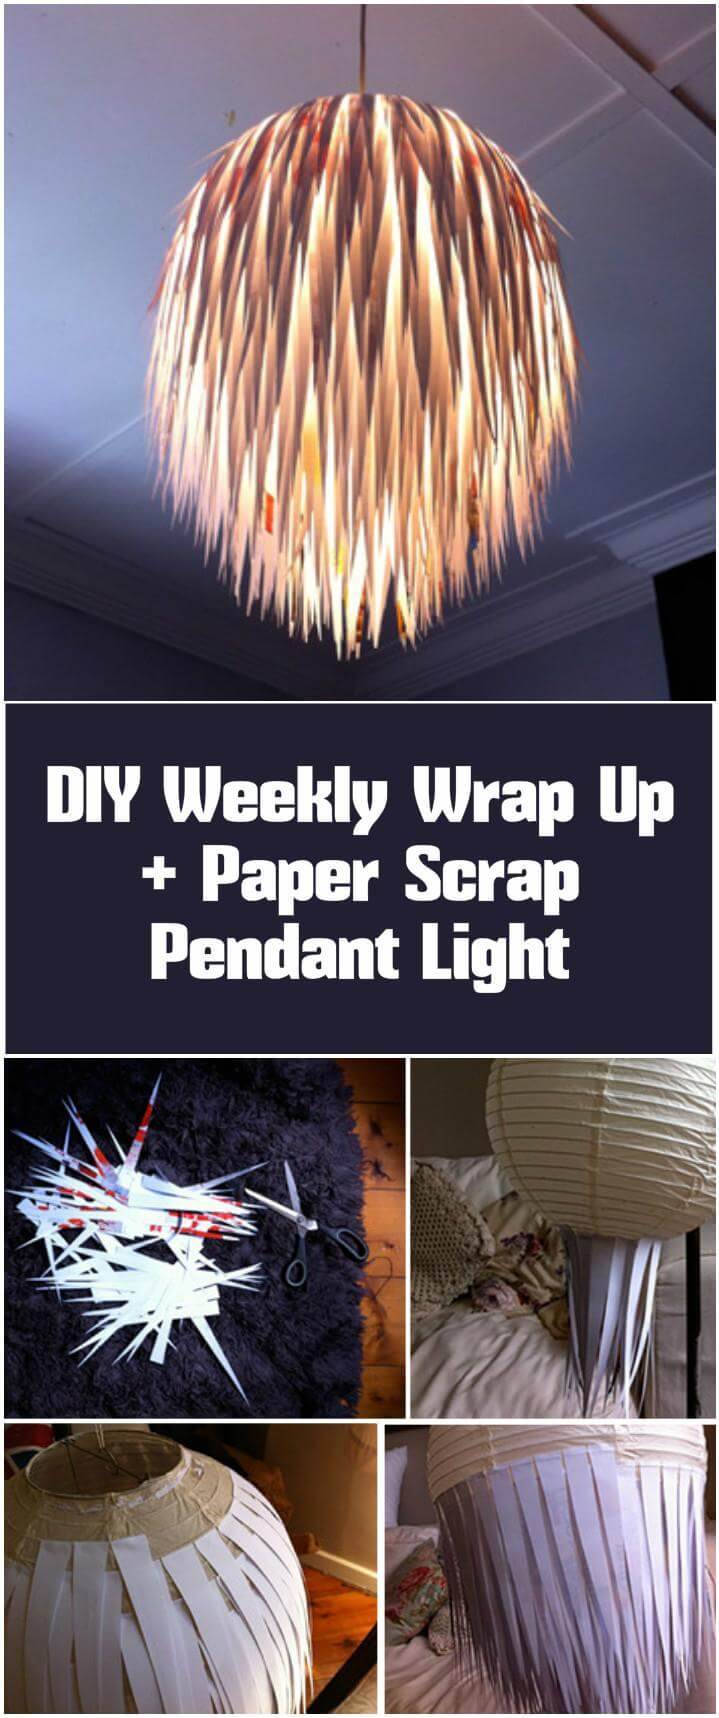 self-made weekly wrap up and paper scrap pendant light